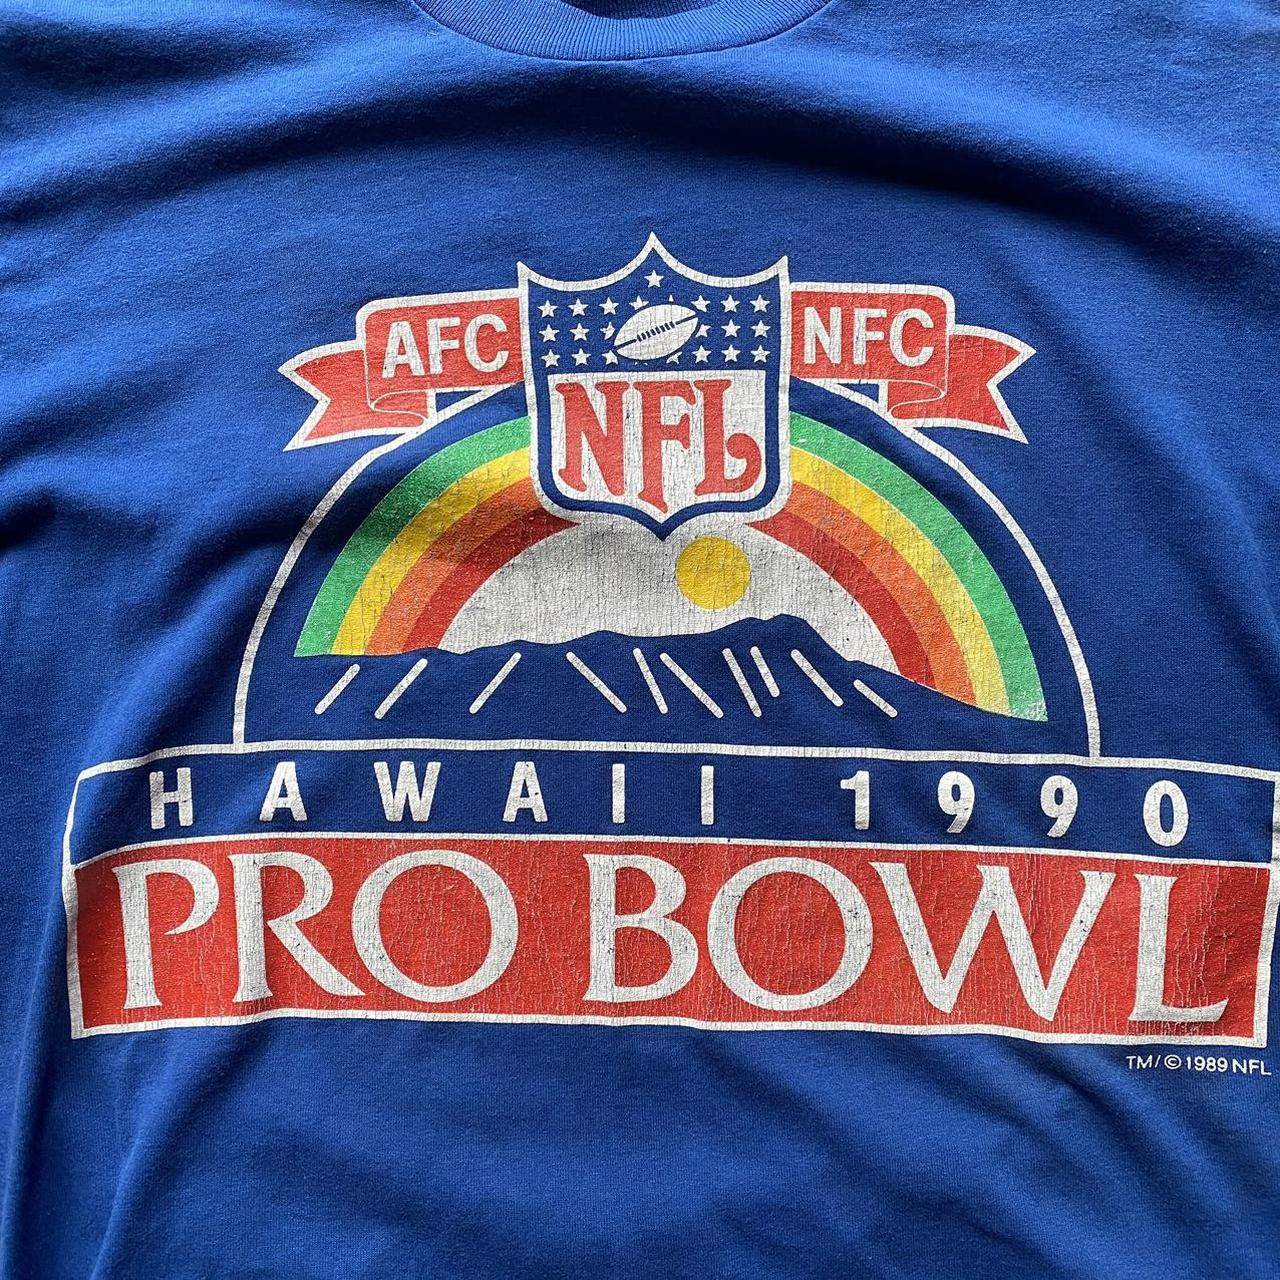 Buy NFL PRO BOWL HAWAII 1983 OVERSIZED T-SHIRT for EUR 38.90 on